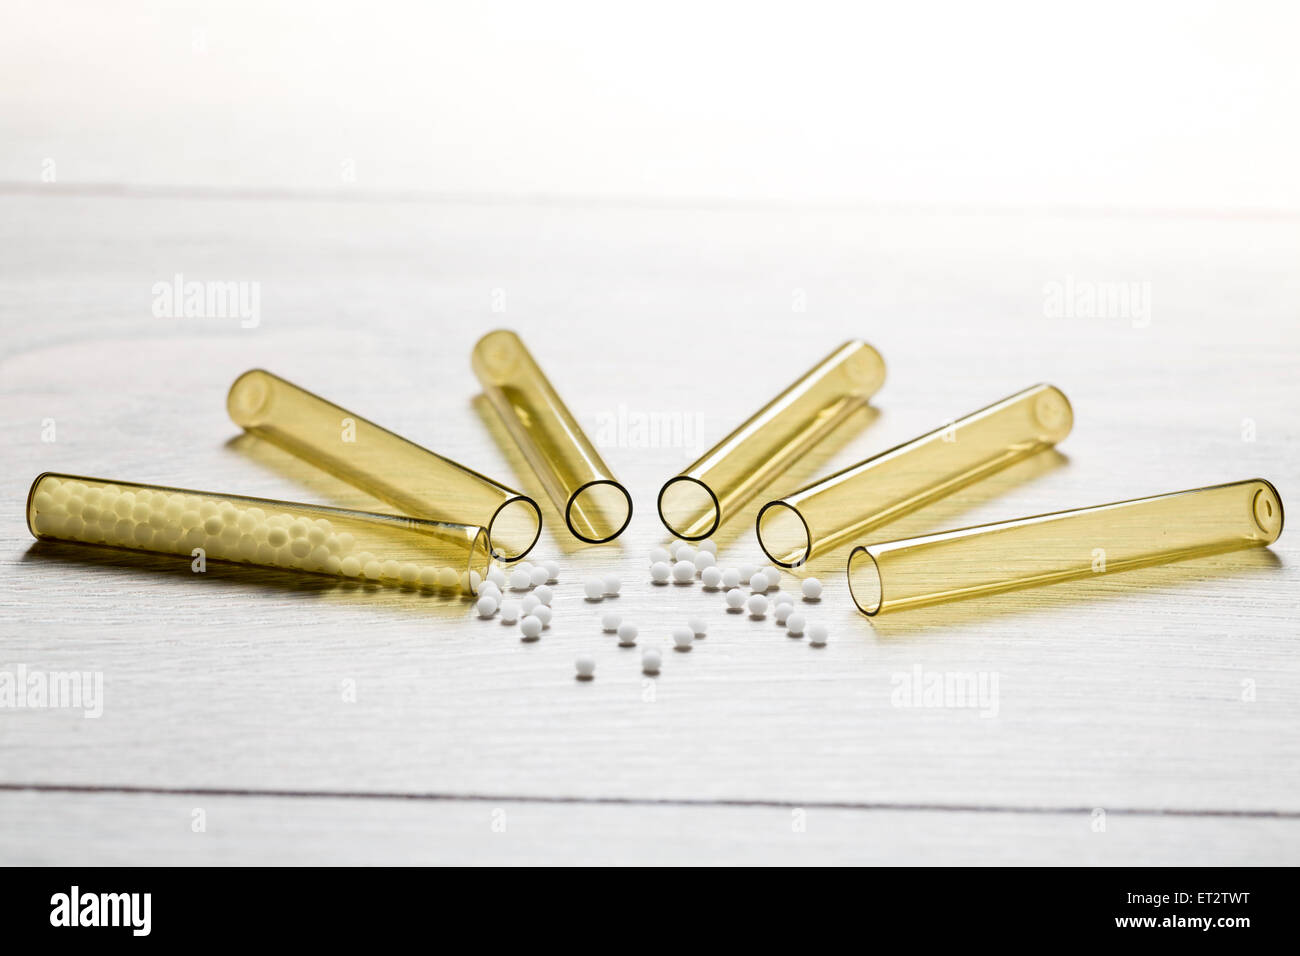 some small glass tubes with homeopathy globules Stock Photo